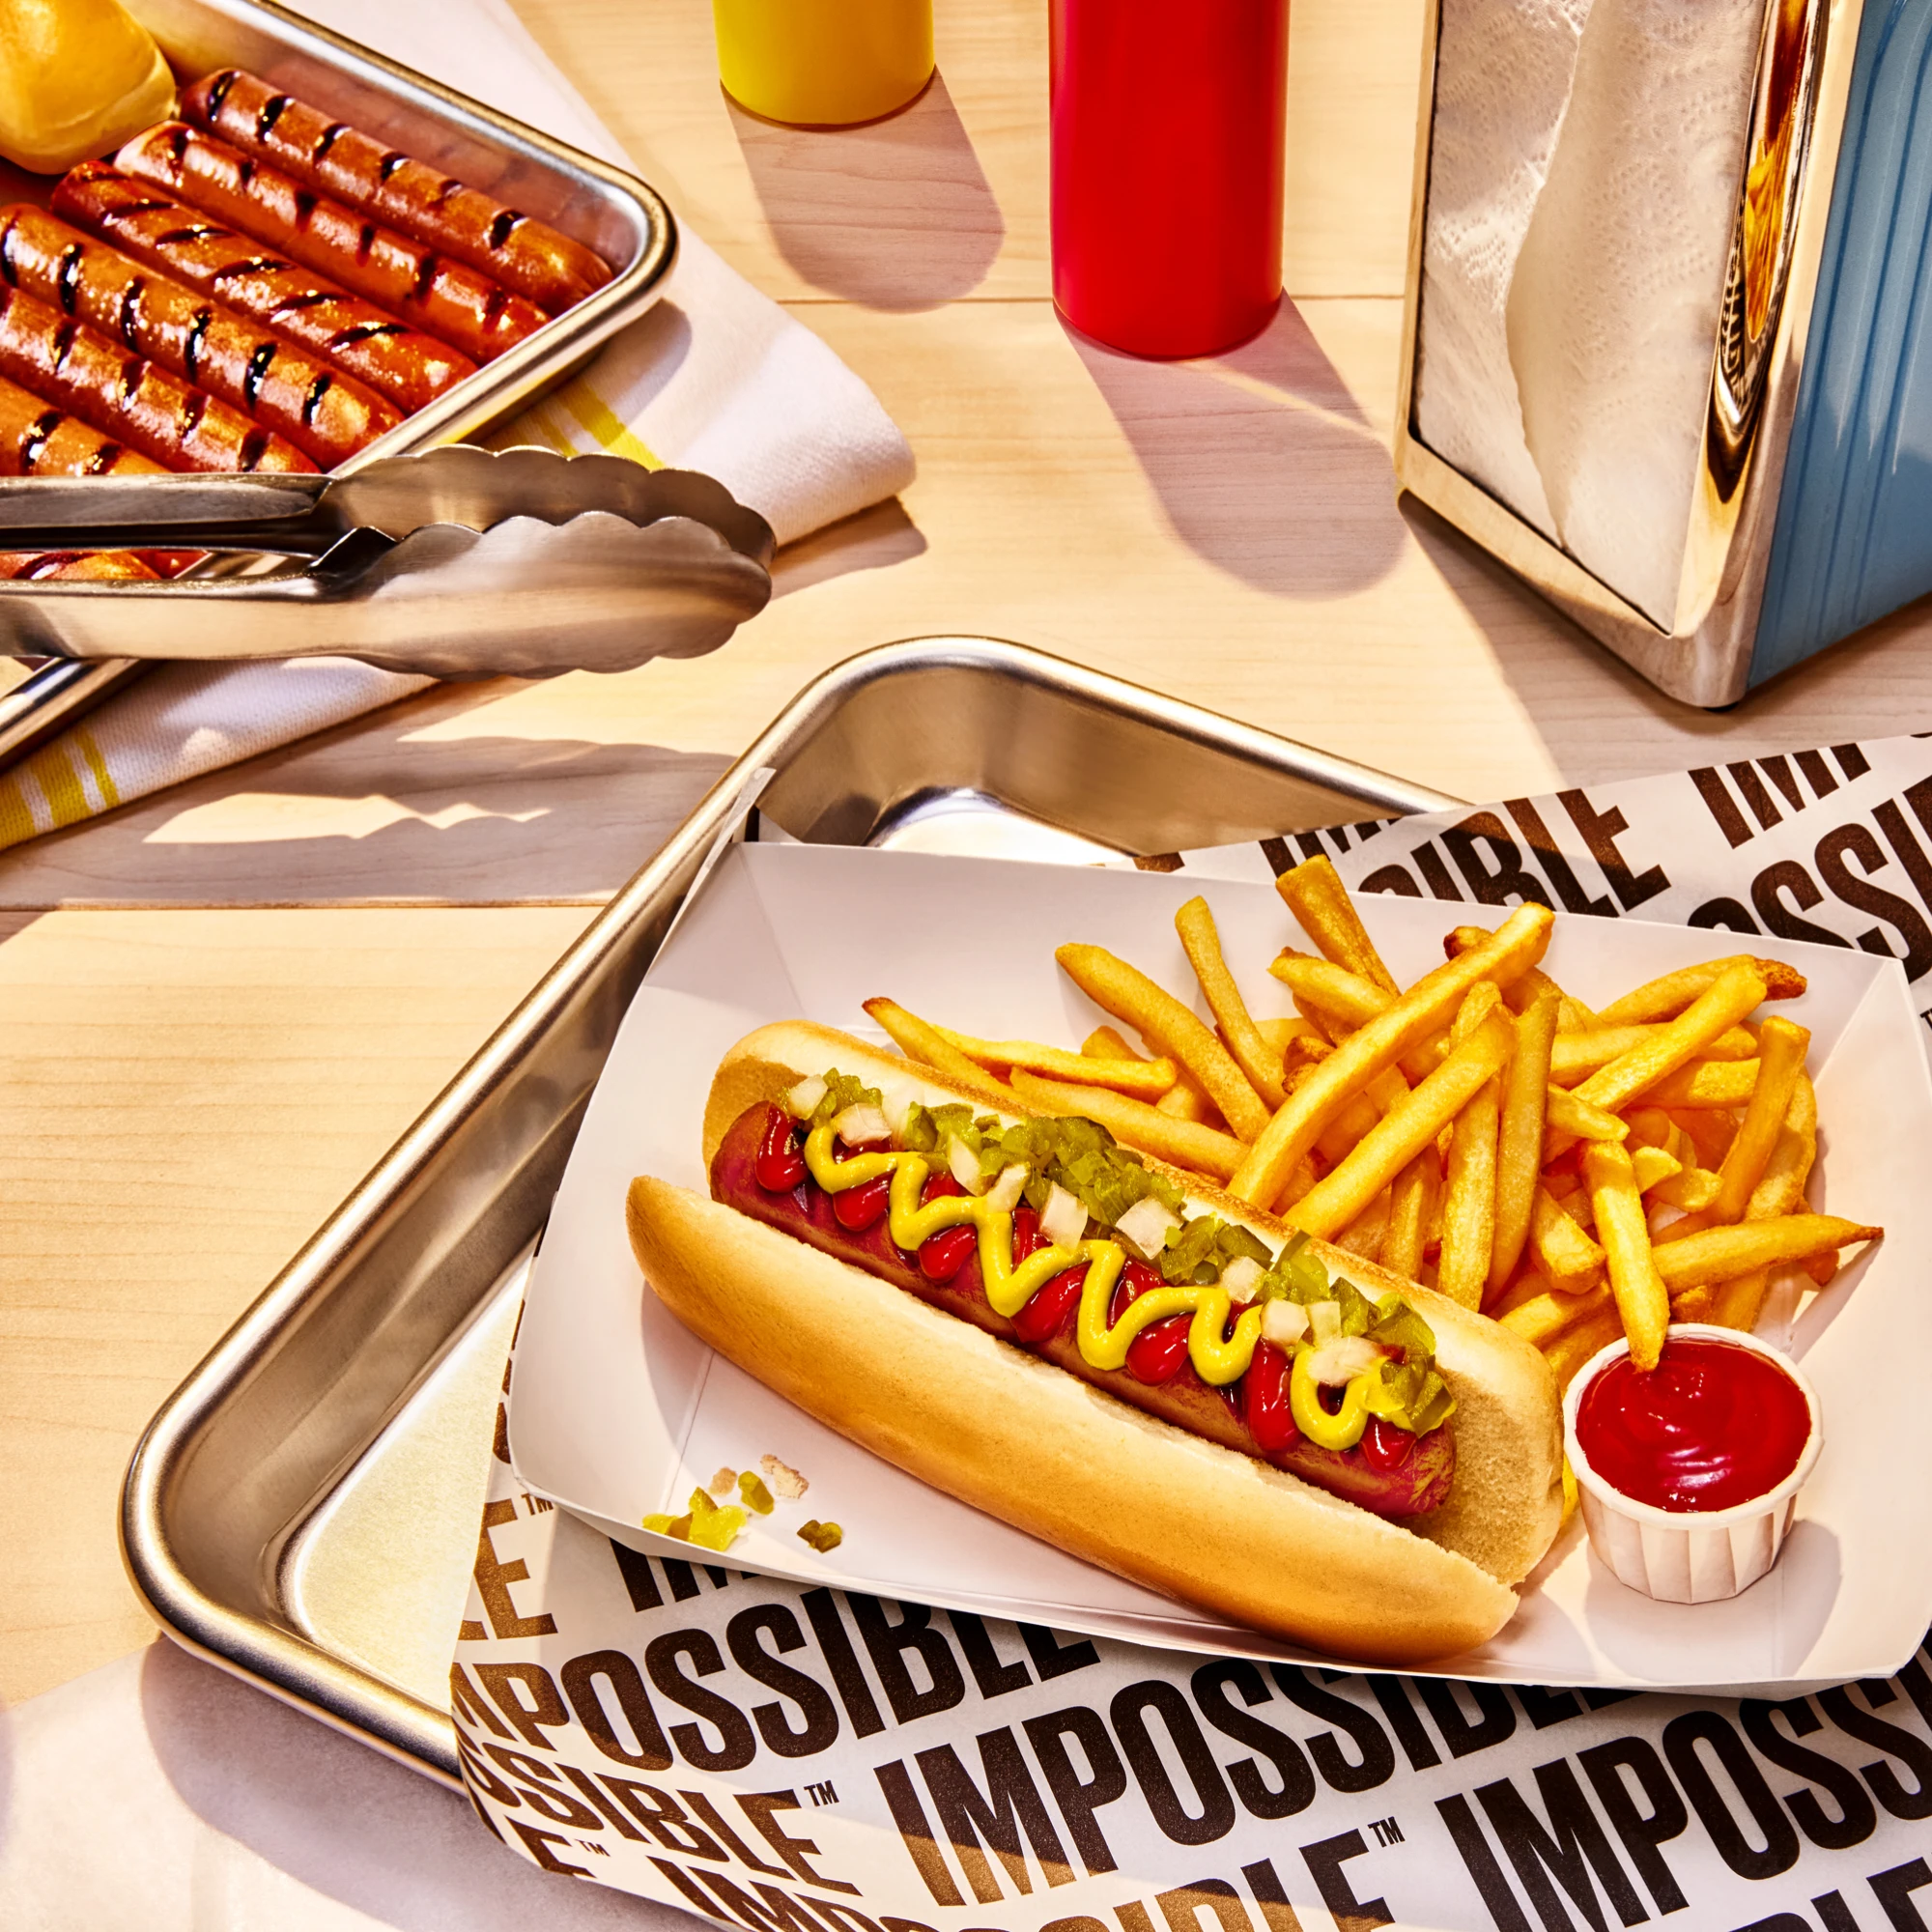 Impossible Beef Hot Dog served on a tray with fries